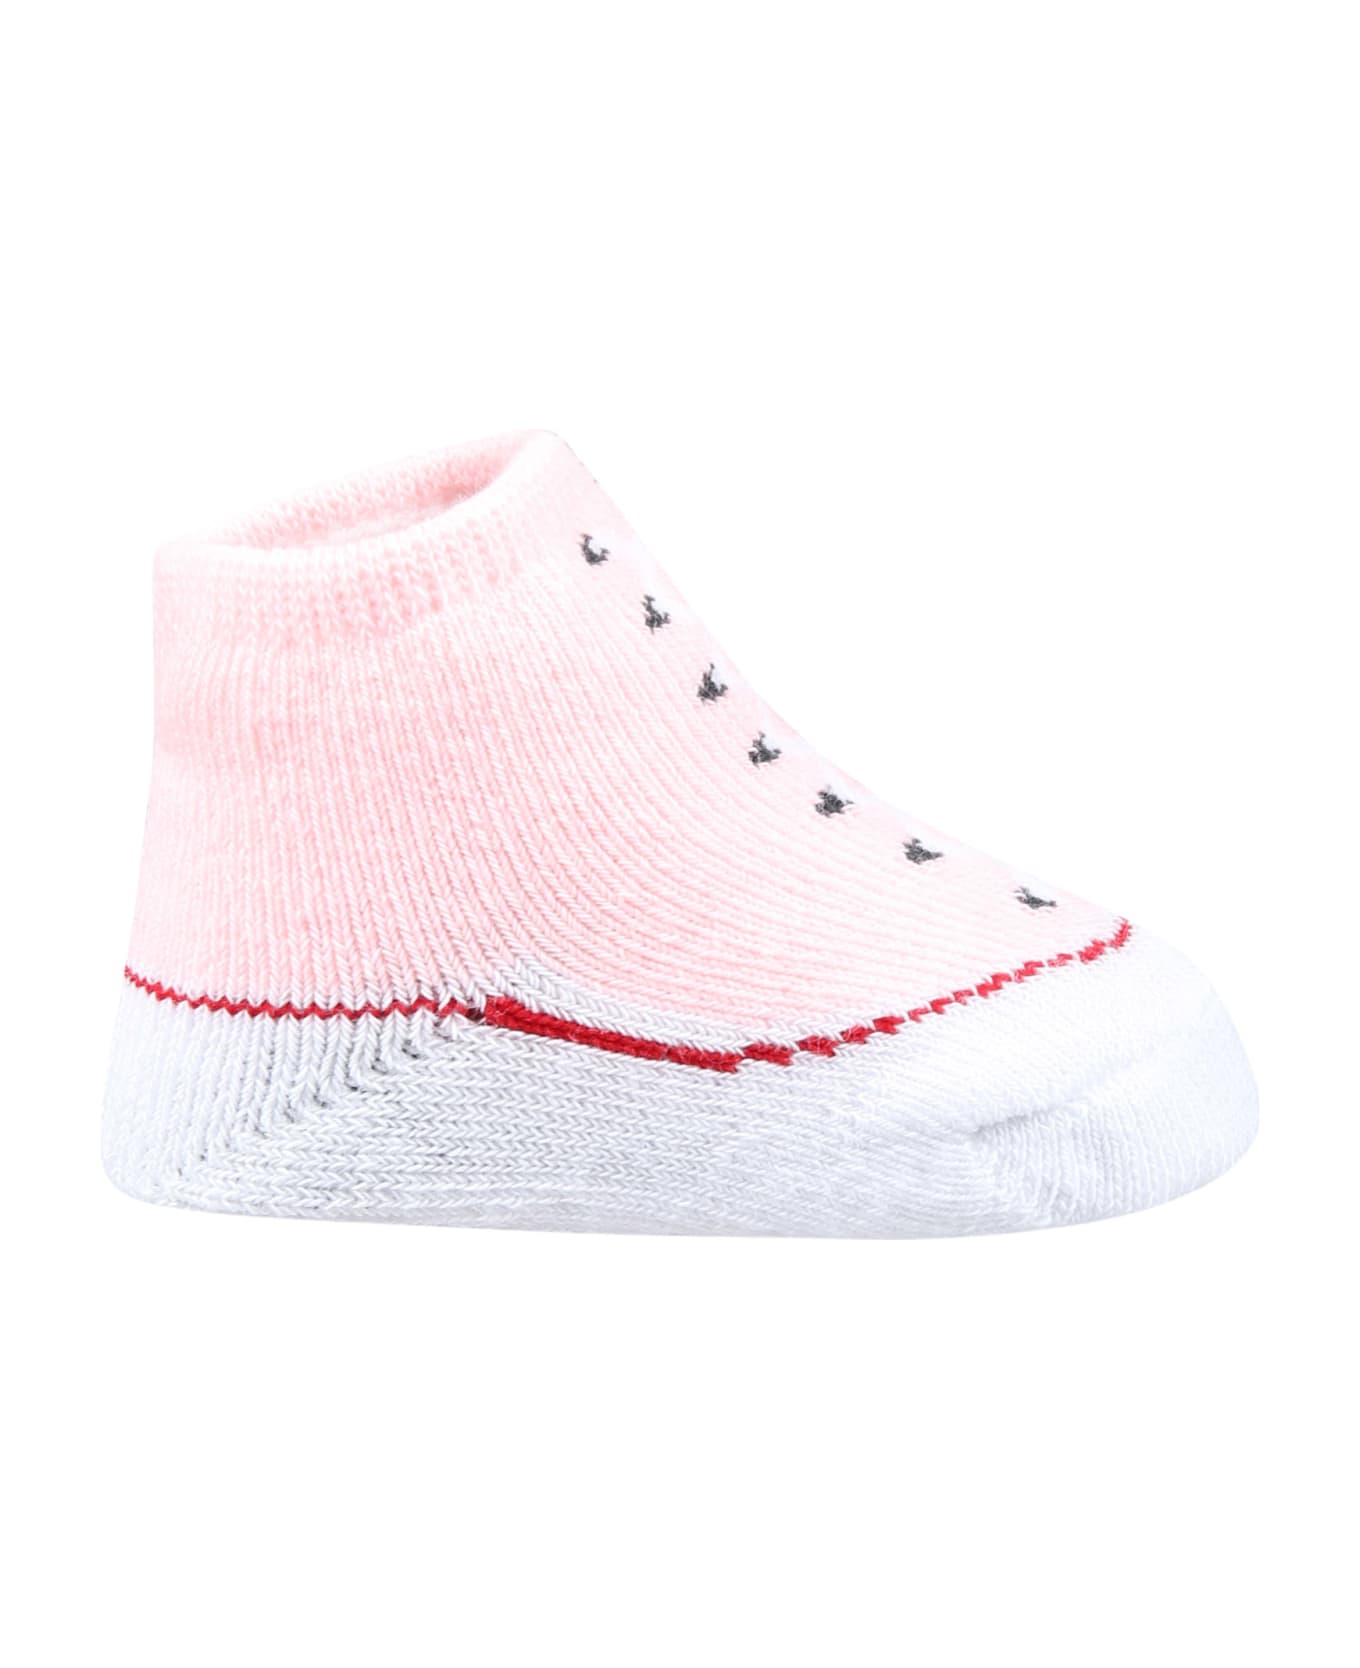 Converse Set Of Multicolor Infant Booties For Baby Girl - Multicolor